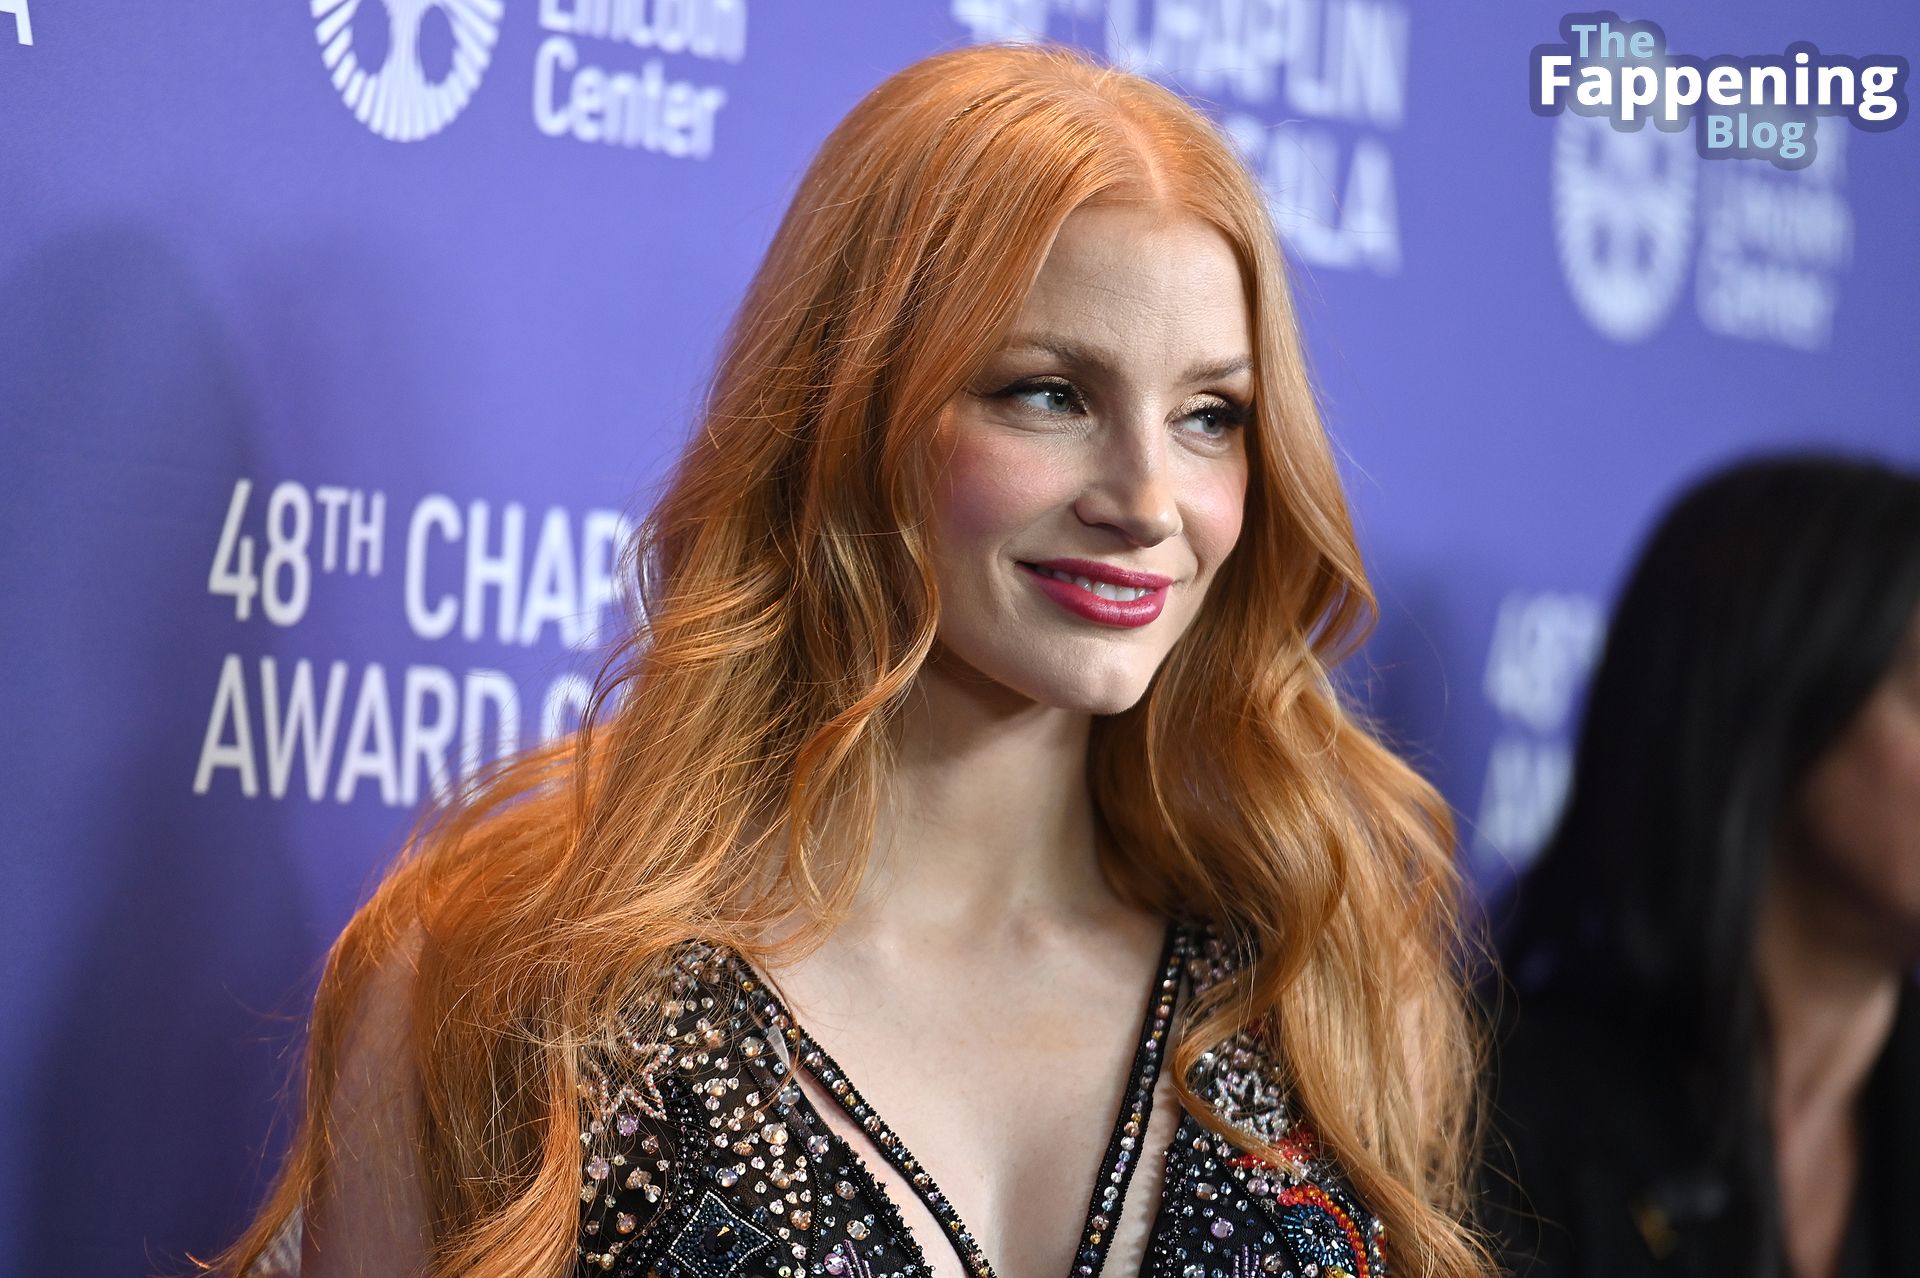 Jessica-Chastain-Sexy-The-Fappening-Blog-107.jpg